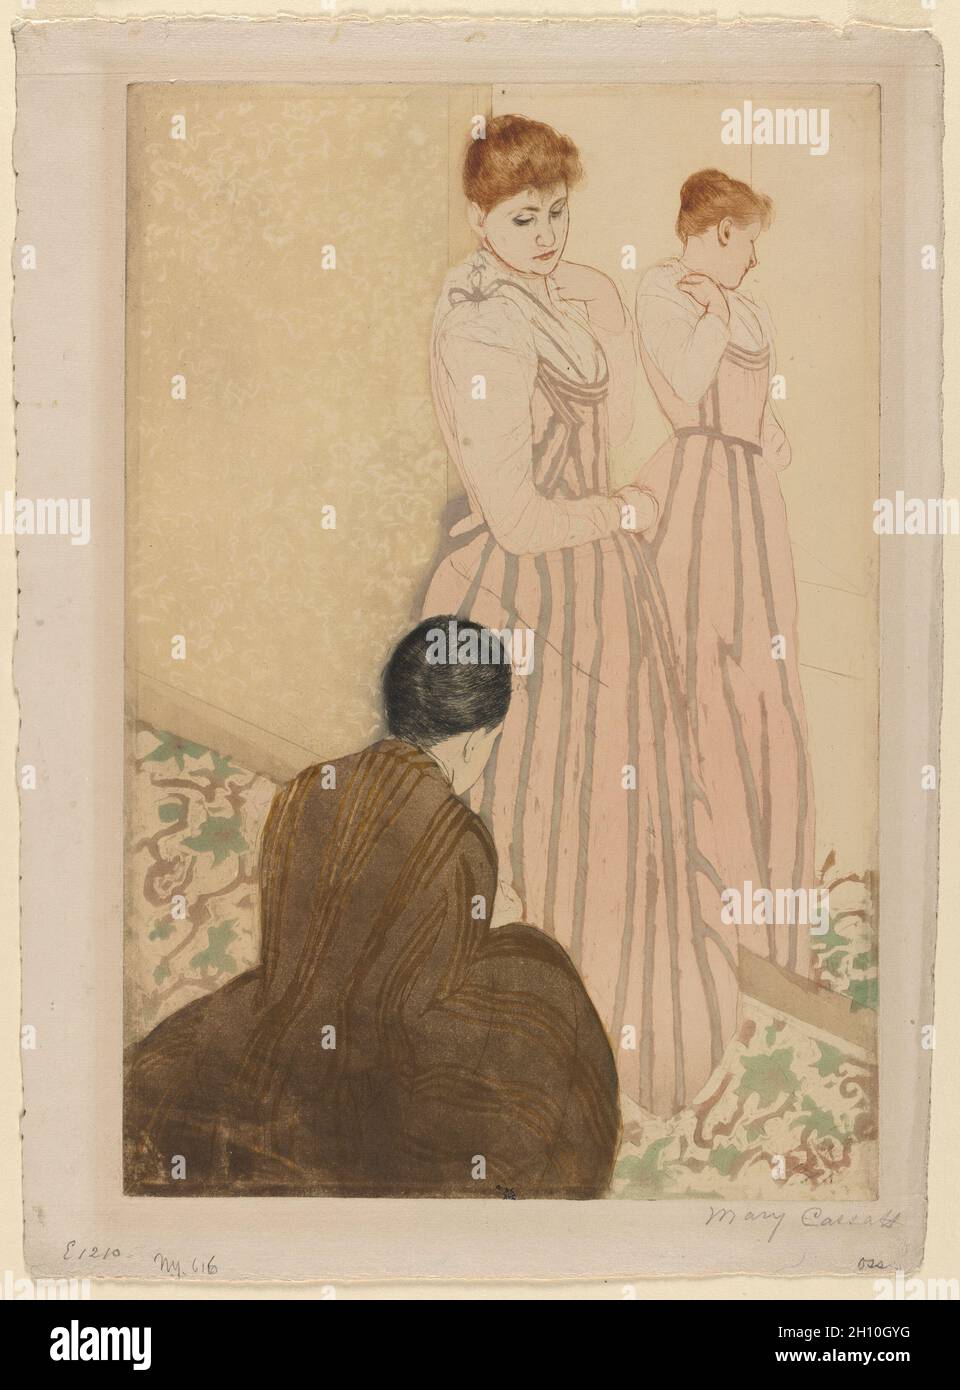 The Fitting, 1890–91. Mary Cassatt (American, 1844-1926). Color drypoint and aquatint; platemark: 37.6 x 25.5 cm (14 13/16 x 10 1/16 in.); sheet: 42.7 x 31.4 cm (16 13/16 x 12 3/8 in.). Stock Photo